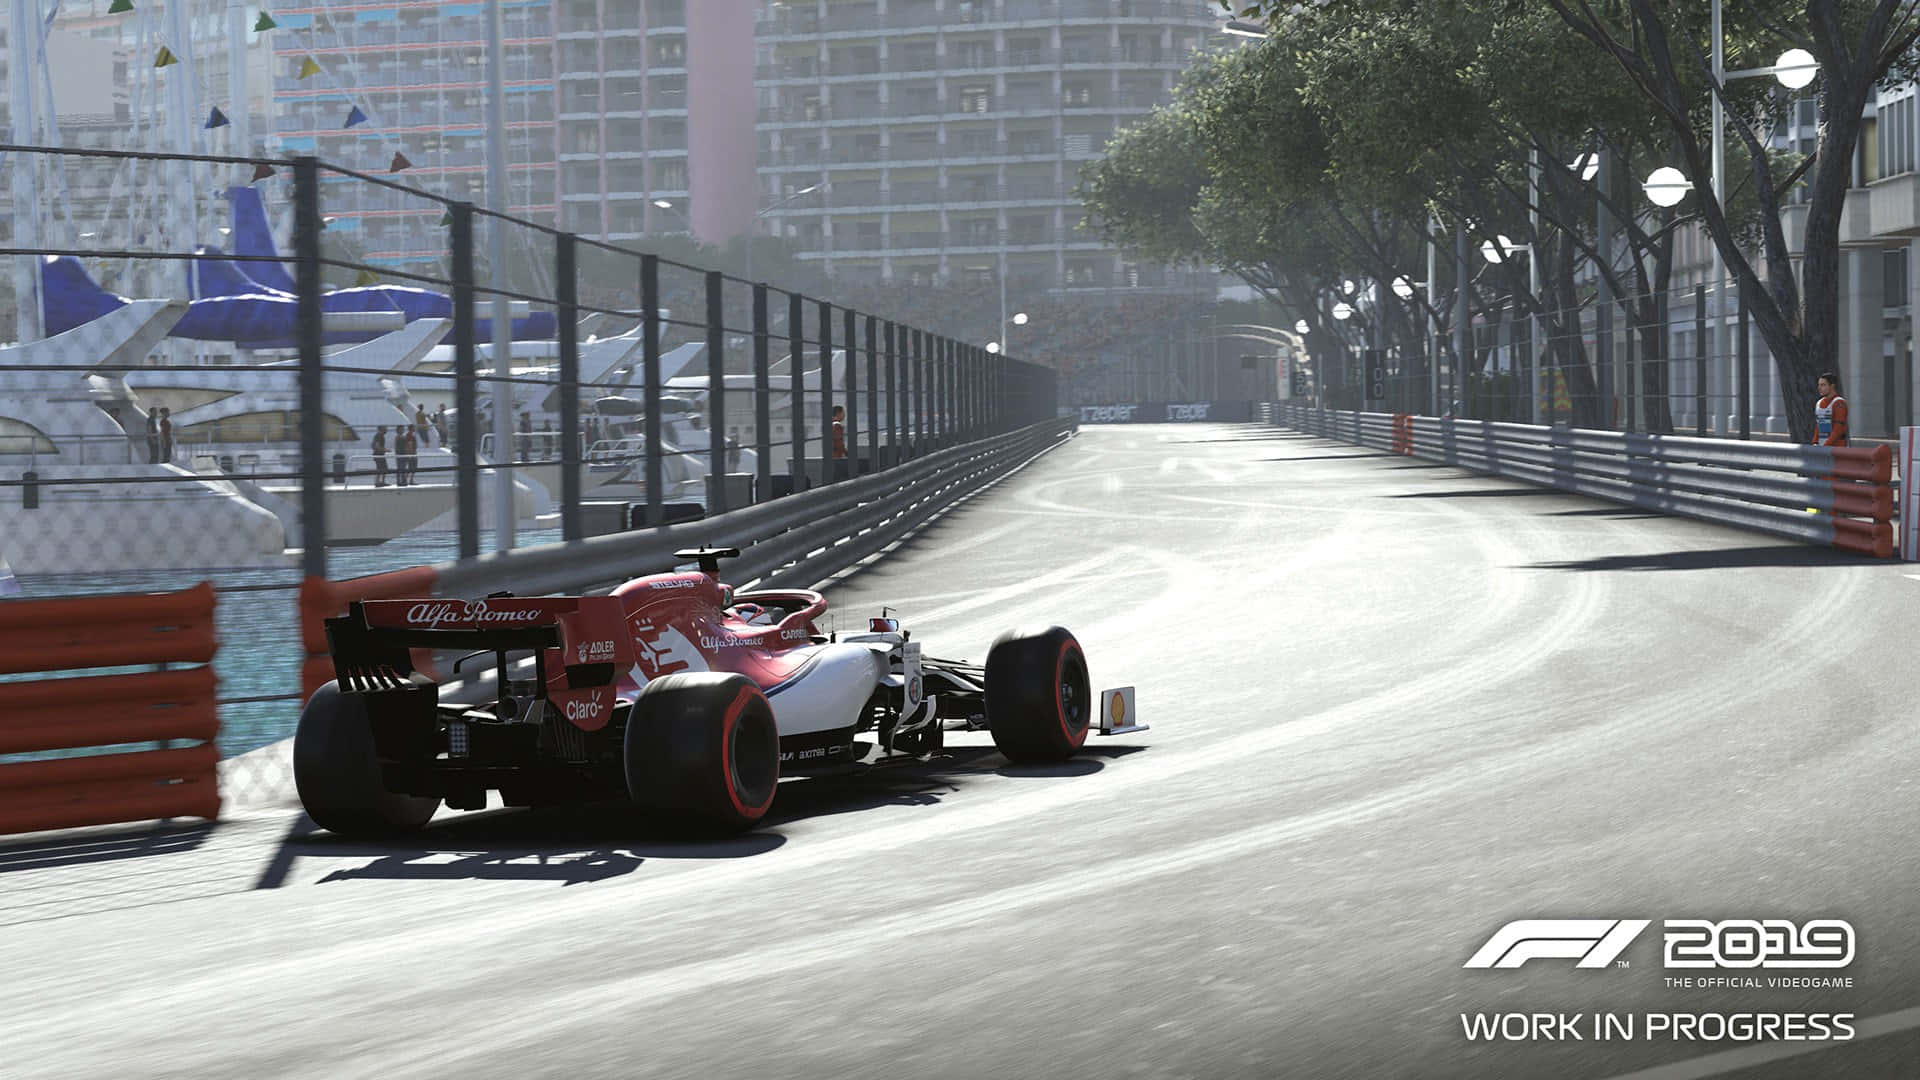 Hd F1 2019 Racetrack Boat And Trees Background